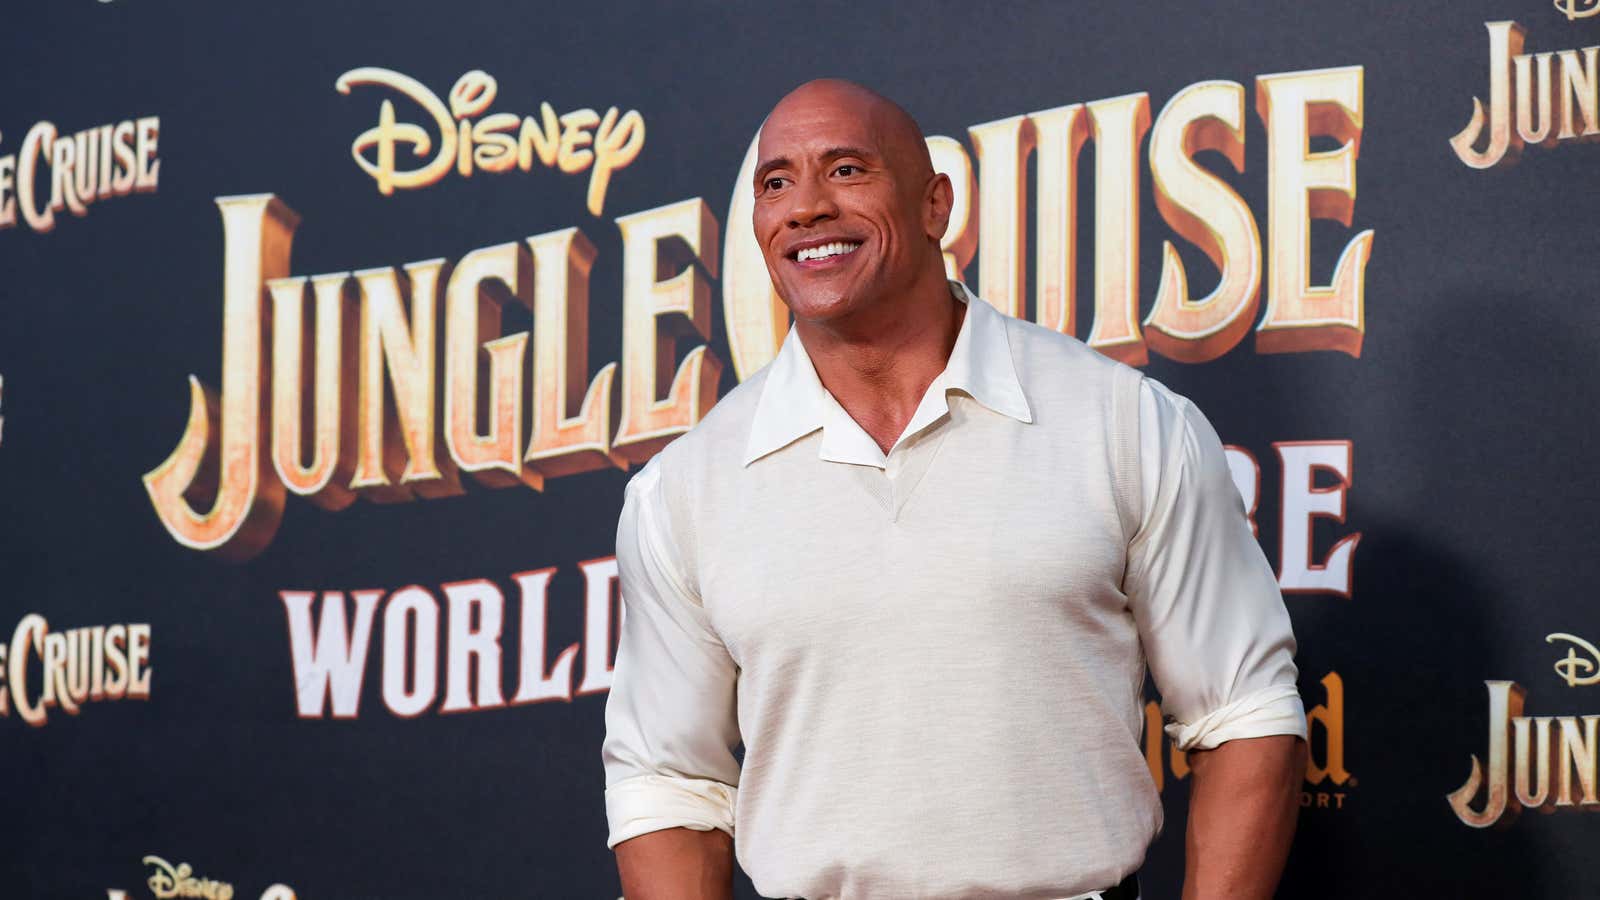 Dwayne Johnson at the premiere for ‘Jungle Cruise’ at Disneyland